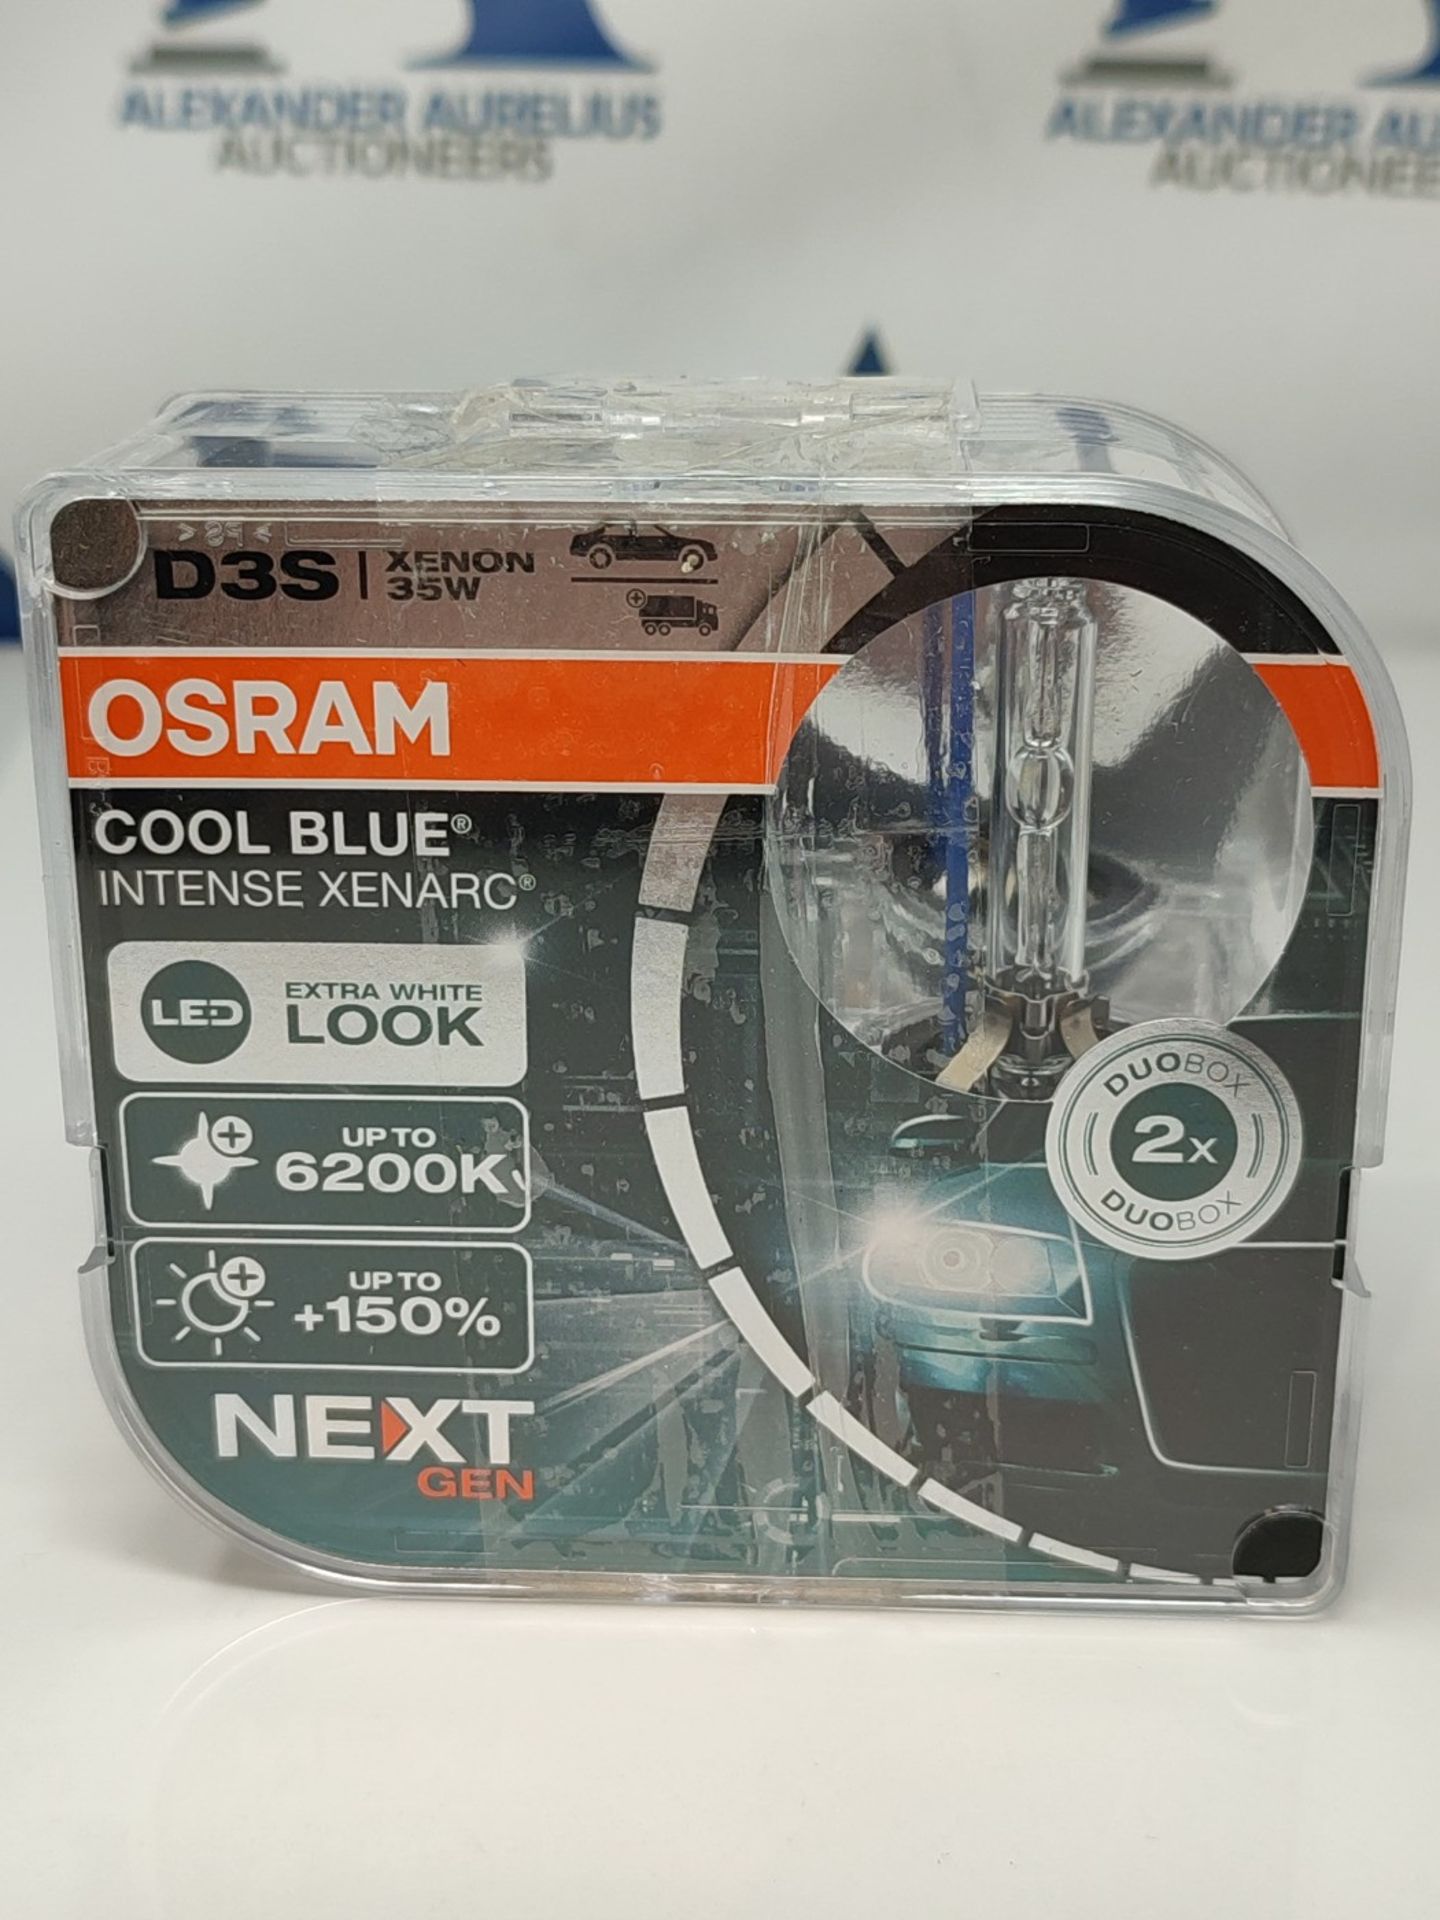 RRP £125.00 OSRAM XENARC COOL BLUE INTENSE D3S, +150% more brightness, up to 6,200K, xenon headlig - Image 2 of 3